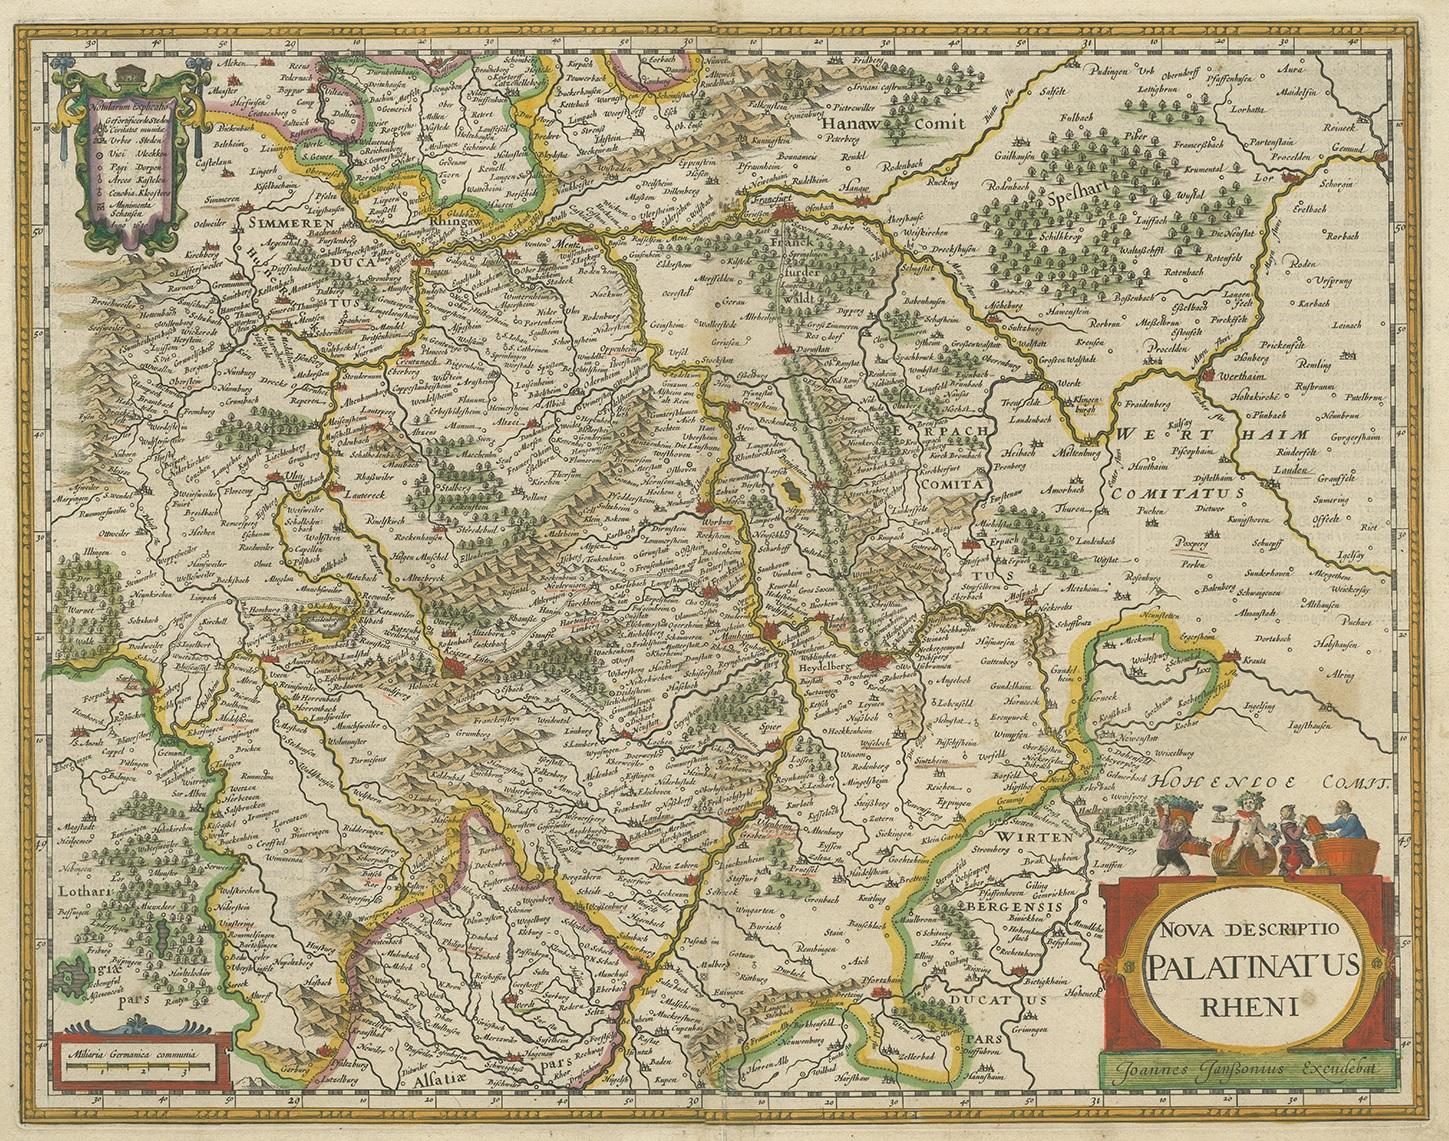 Antique map titled 'Nova Descriptio Palatinatus Rheni'. Detailed map of the Rhine-Palatinate, a state of Germany located in the west of the country. The map tracks the course of the Rhine from the Alsace Region to Frankfurt and Bungen. Some of the